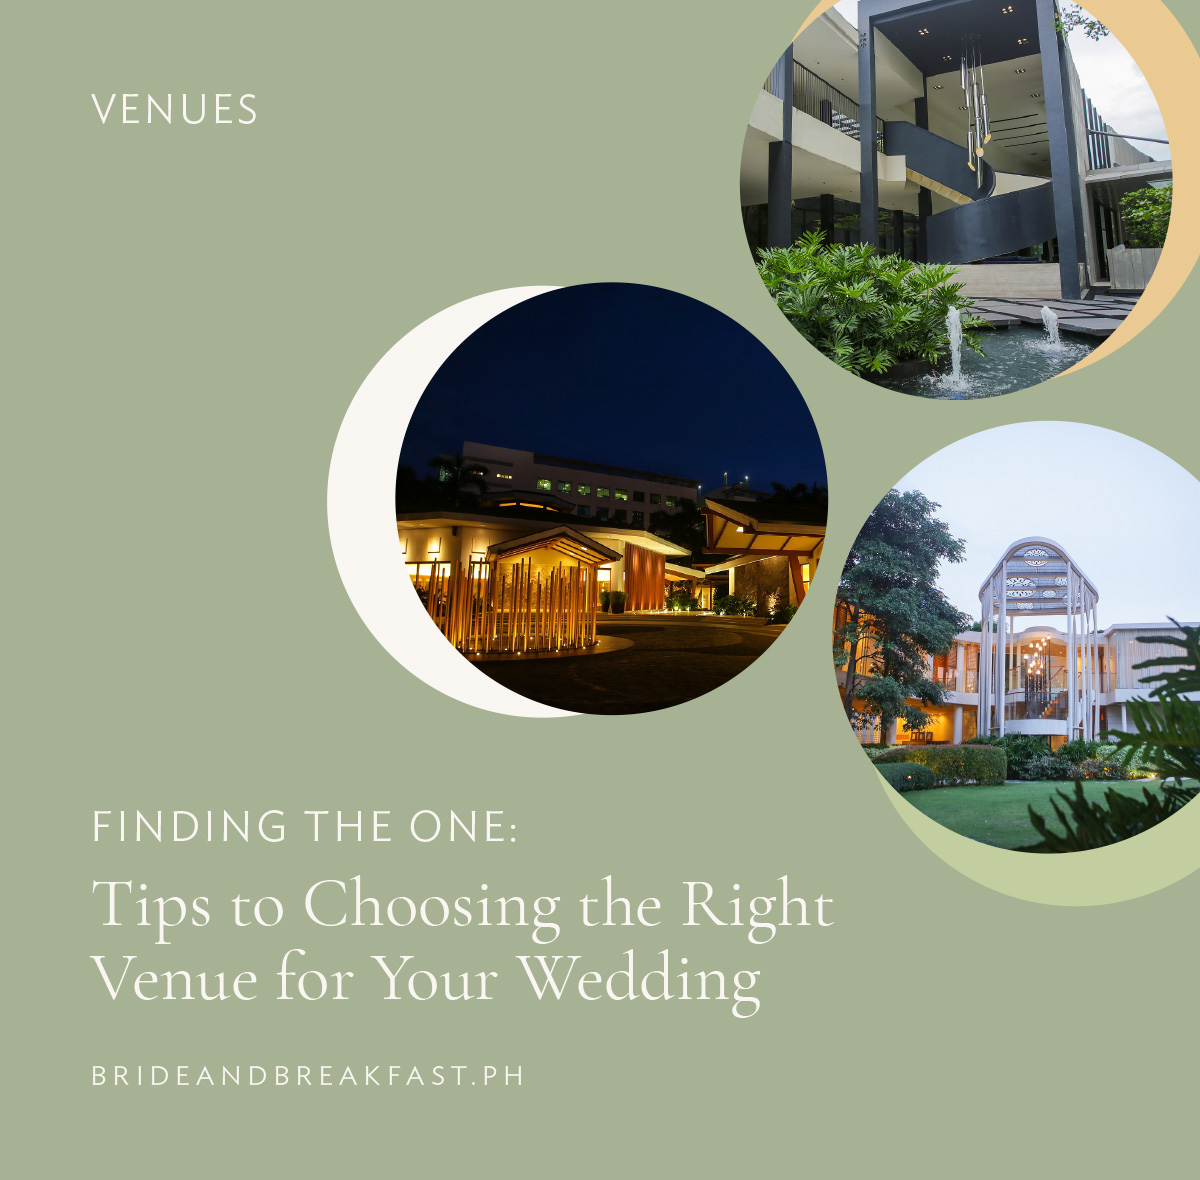 Finding the One: 5 Tips to Choosing the Right Venue for Your Wedding